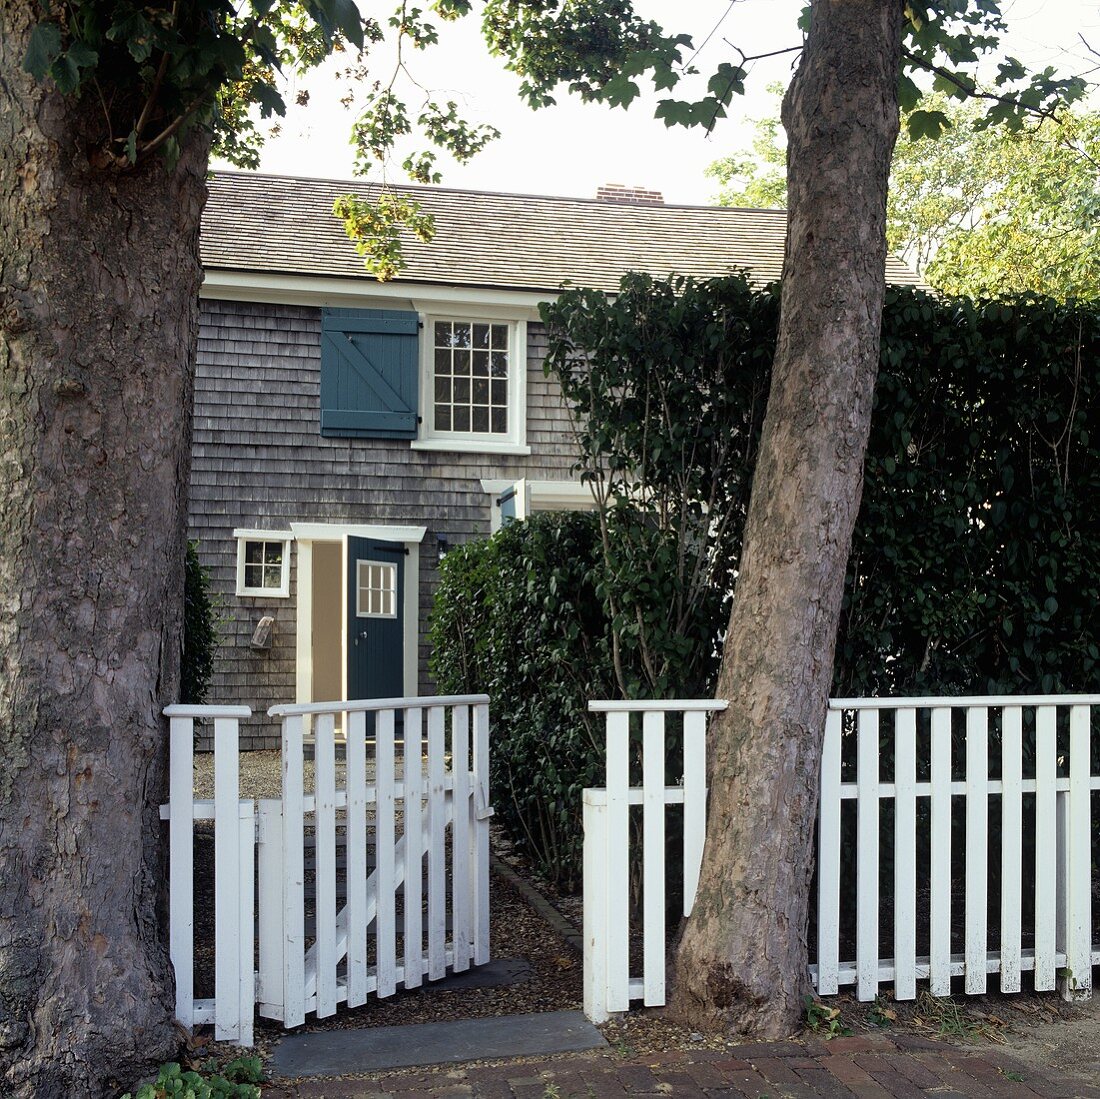 A detached house with a white garden fence